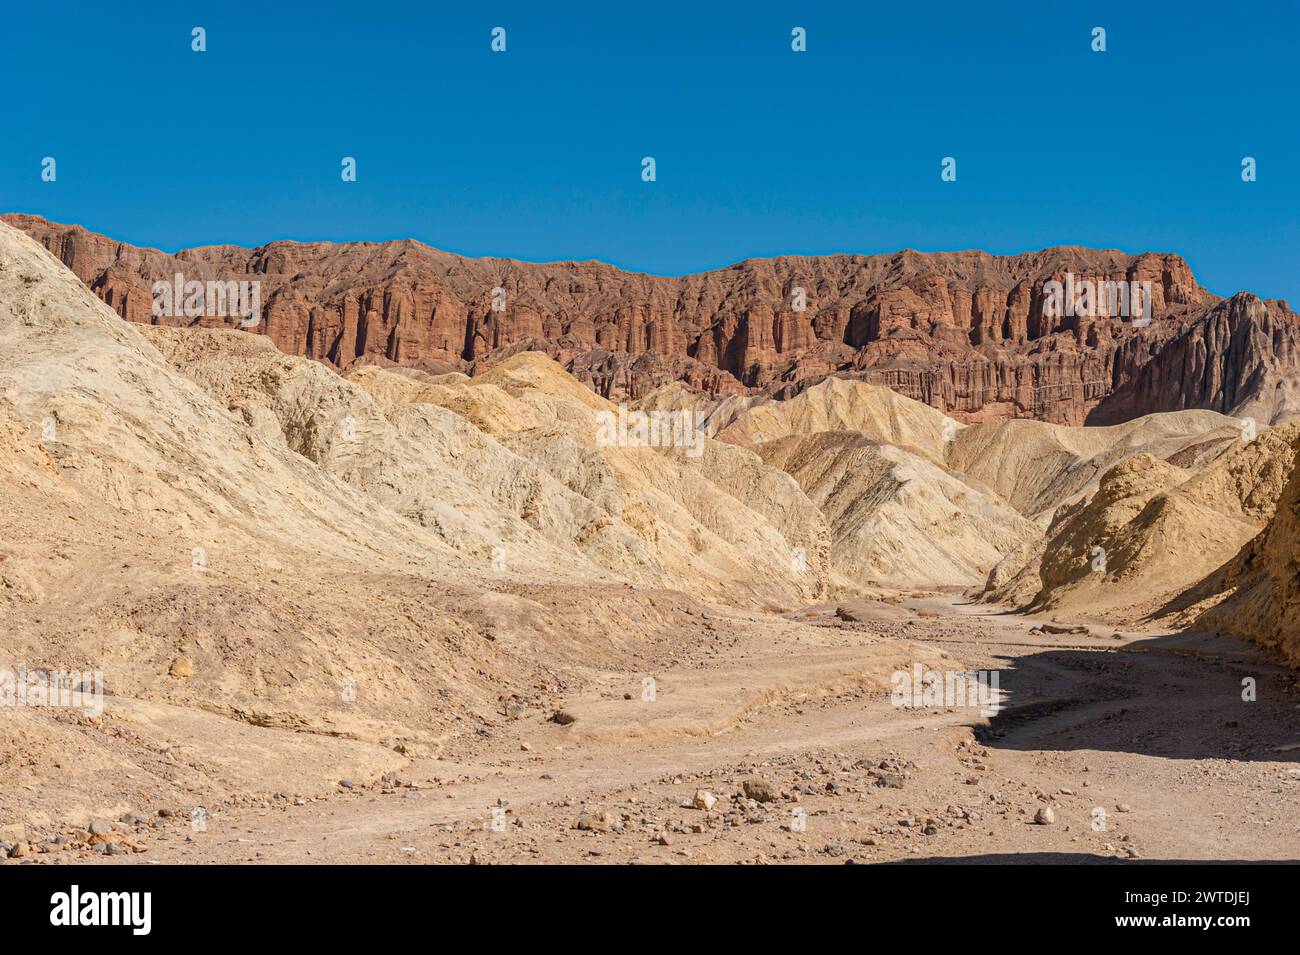 Death Valley Arroyo or dry river bed, USA Stock Photo